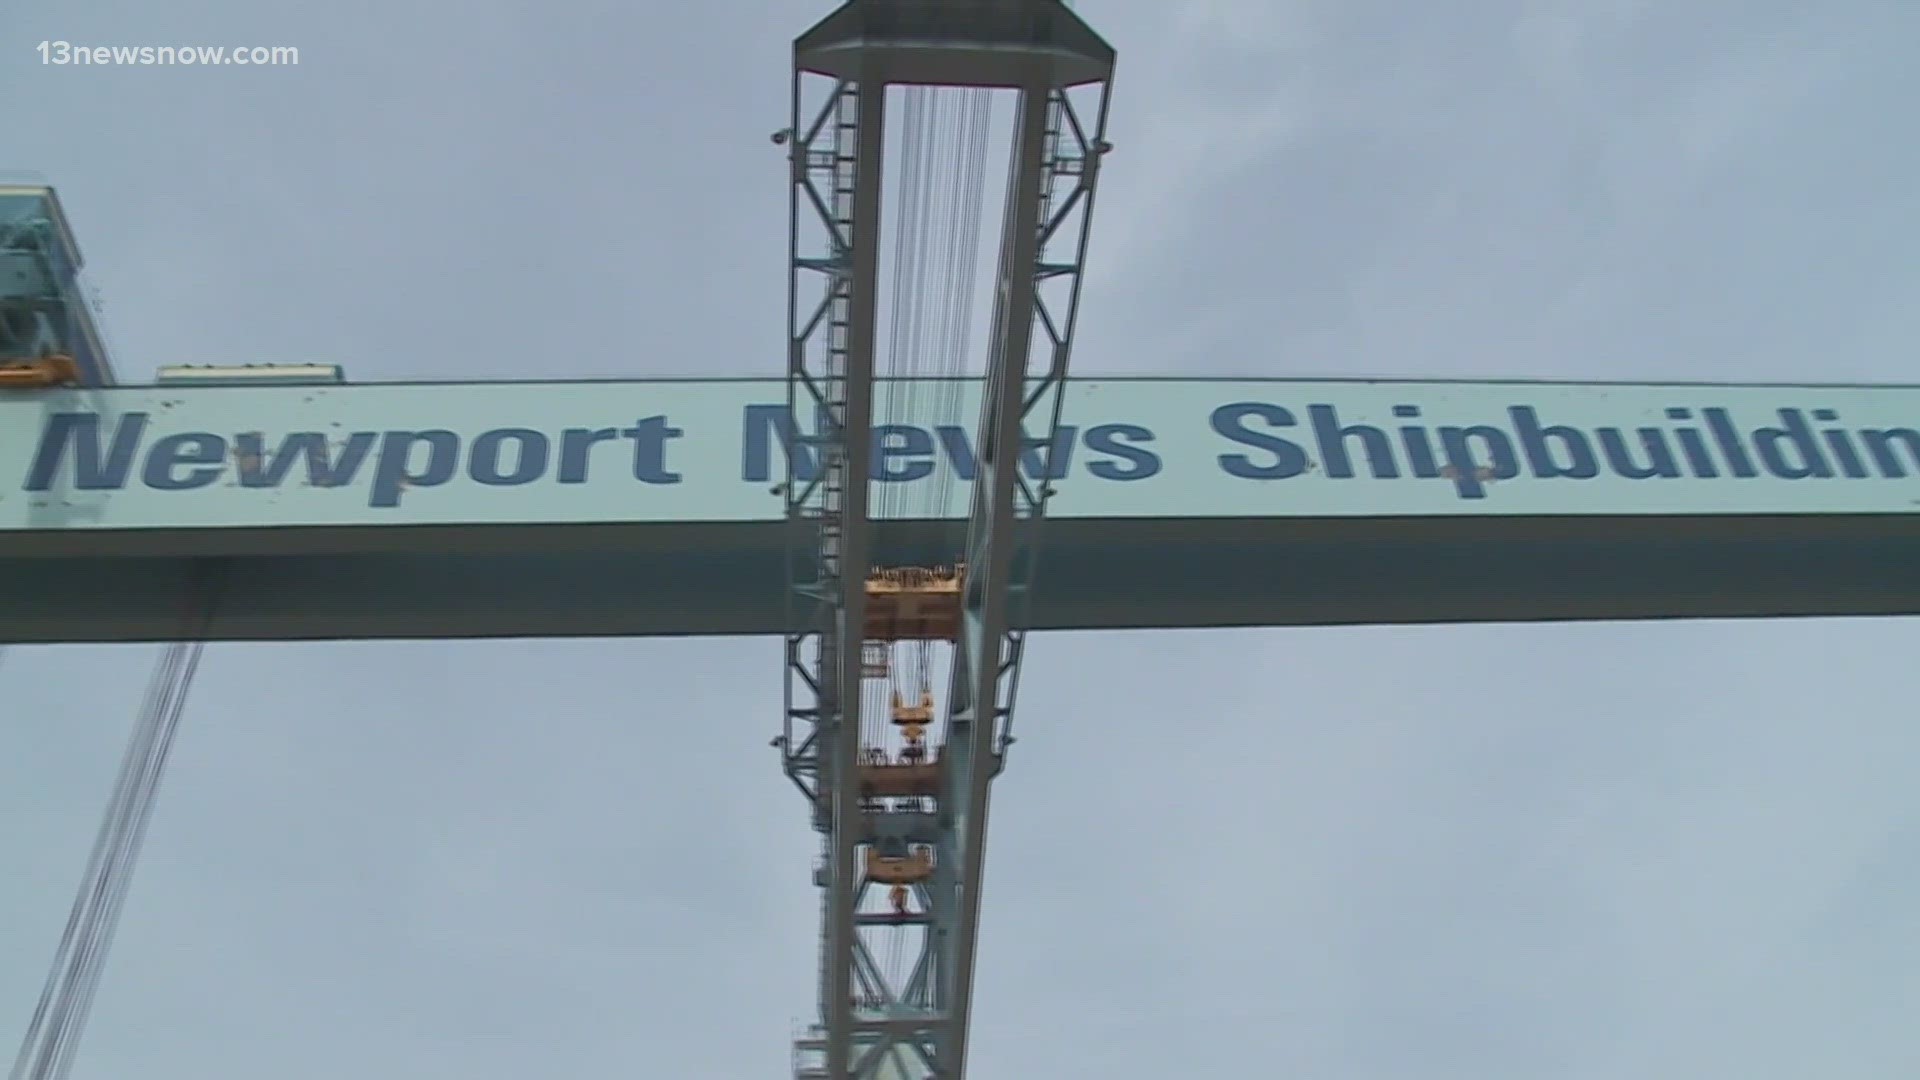 Virginia lawmakers are hoping to make the commute a little easier for sailors at Newport News Shipbuilding.